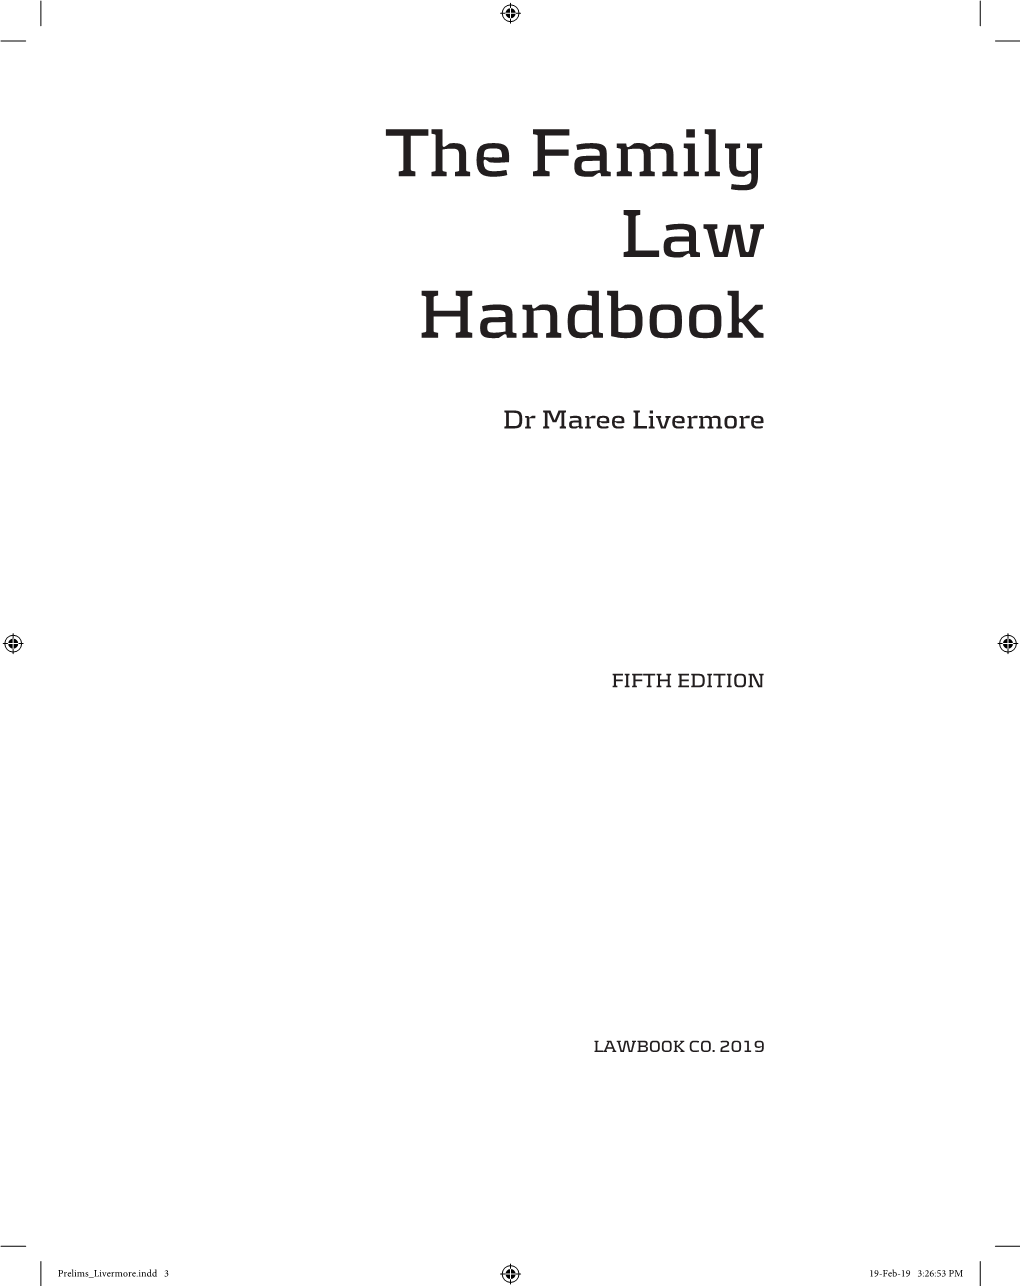 The Family Law Handbook 5E Chapter 2 Marriage